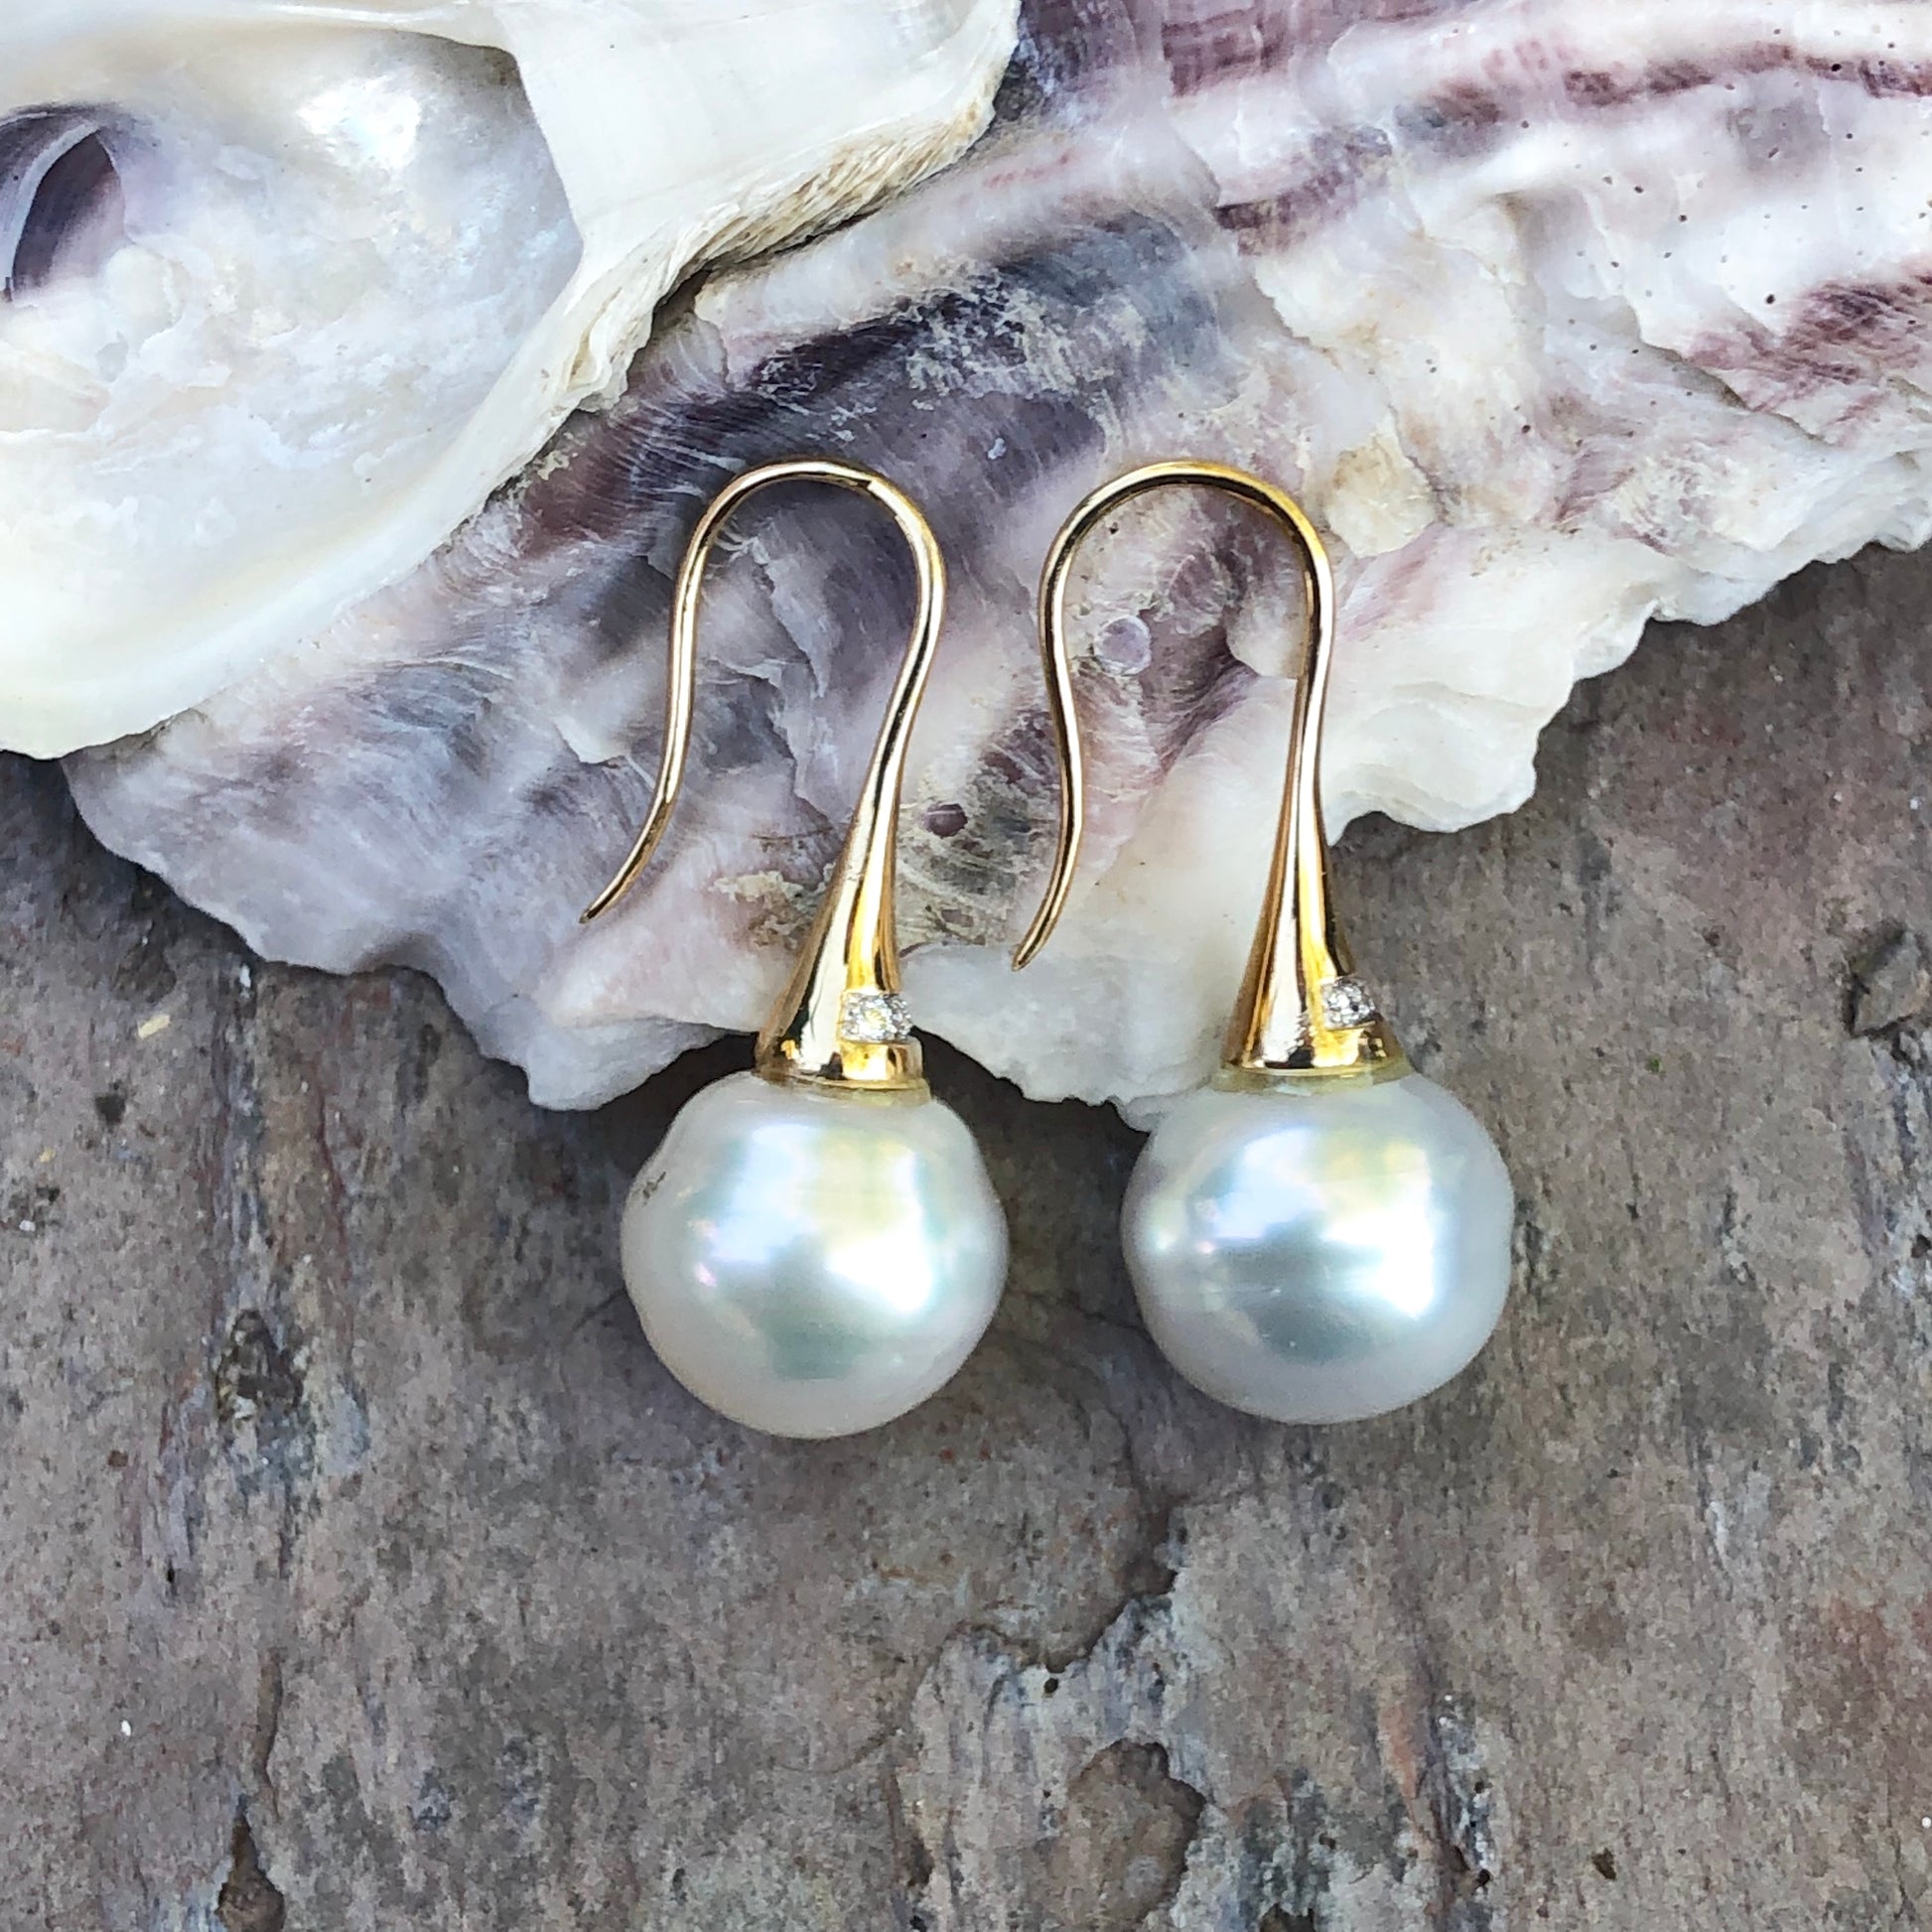 14KT Yellow Gold Pave Diamond + Paspaley Pearl Drop Earrings, 14KT Yellow Gold Pave Diamond + Paspaley Pearl Drop Earrings - Legacy Saint Jewelry